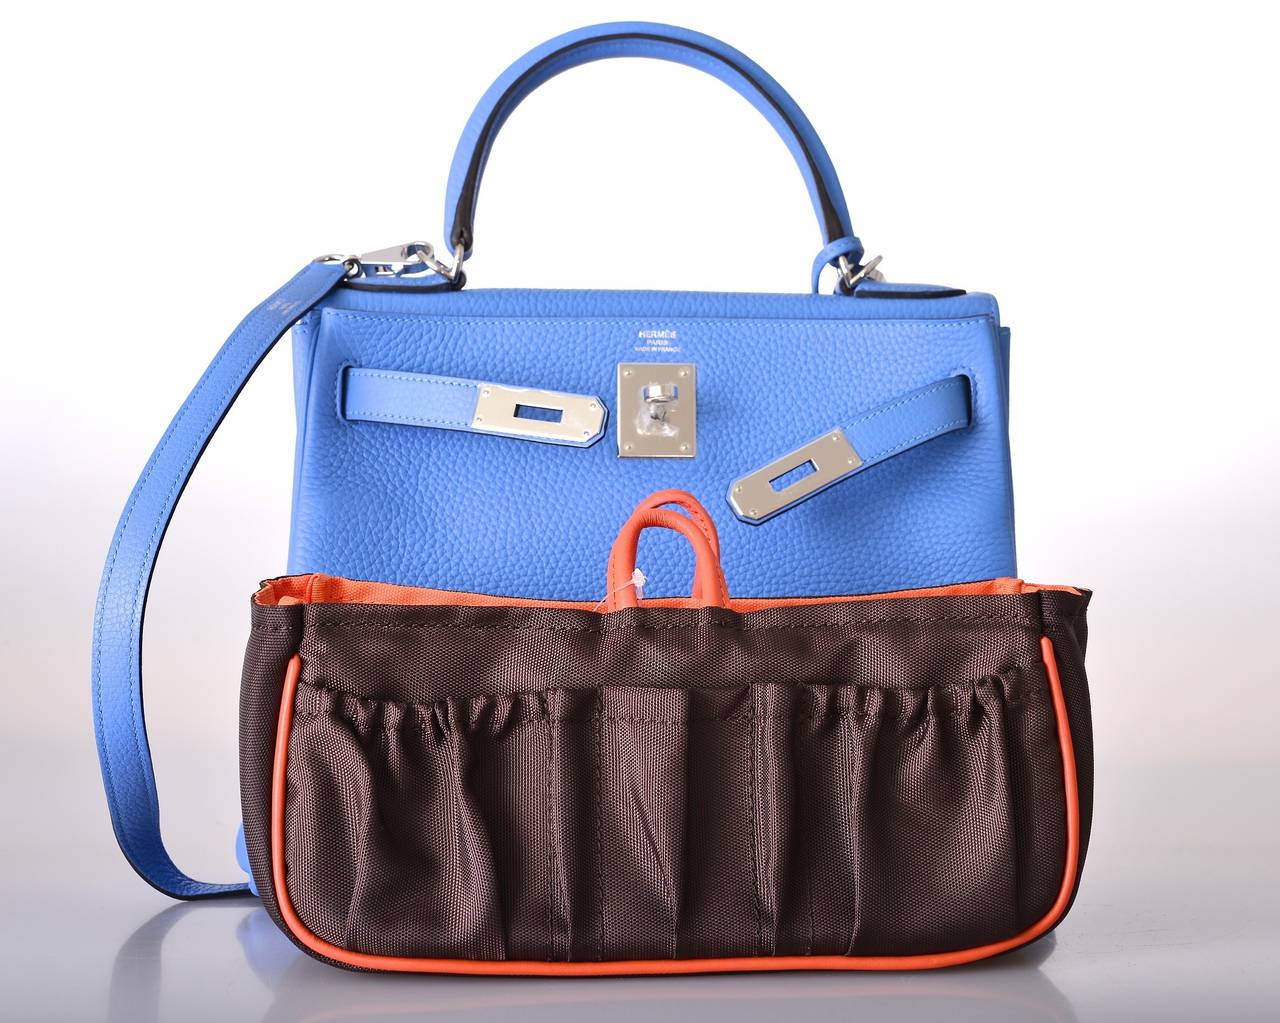 As always, another one of my fab finds!
Hermes 28cm KELLY  NEW COLOR BLUE PARADISE TOGO LEATHER! PALLADIUM HARDWARE.

This bag is brand new with original box and accessories.
THERE IS NO WAITING! NO ATTITUDE EVER! ENJOY! TREAT YOURSELF, BECAUSE